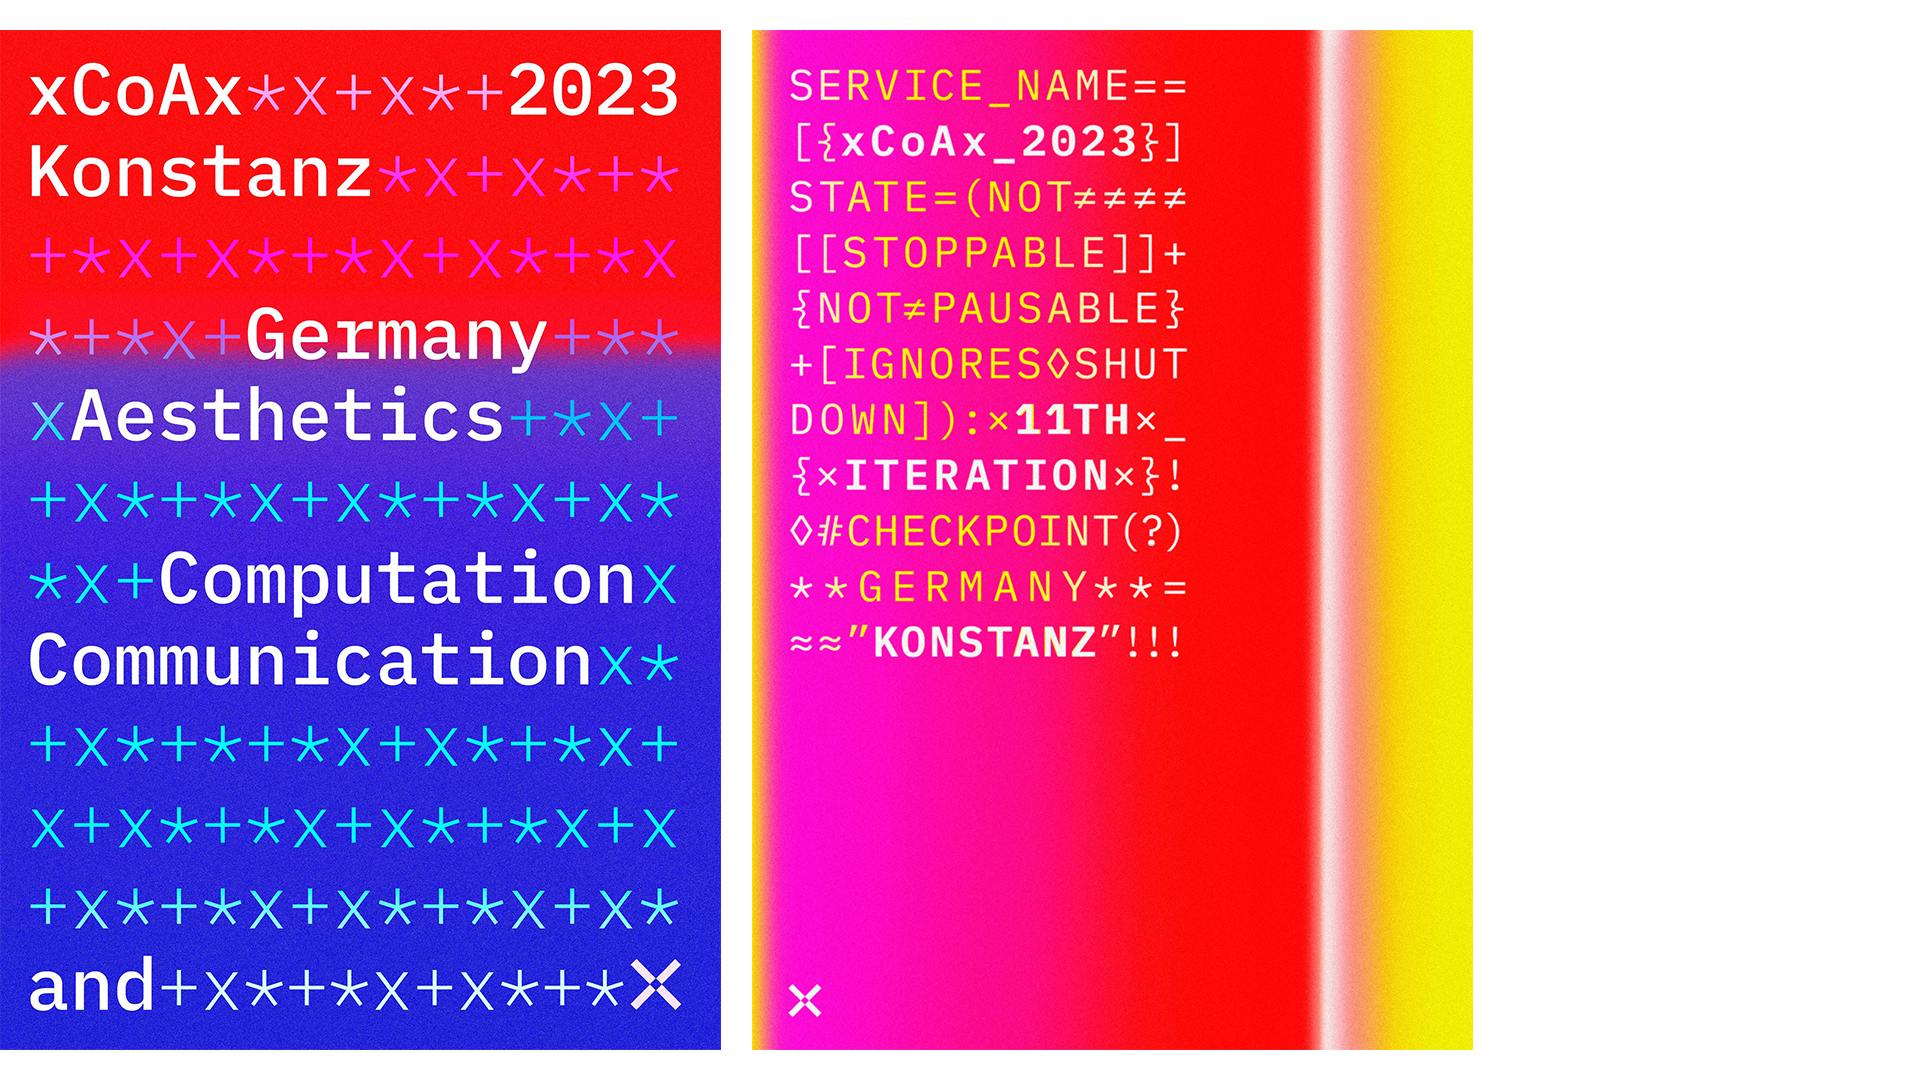 xCoAx 2023 posters.